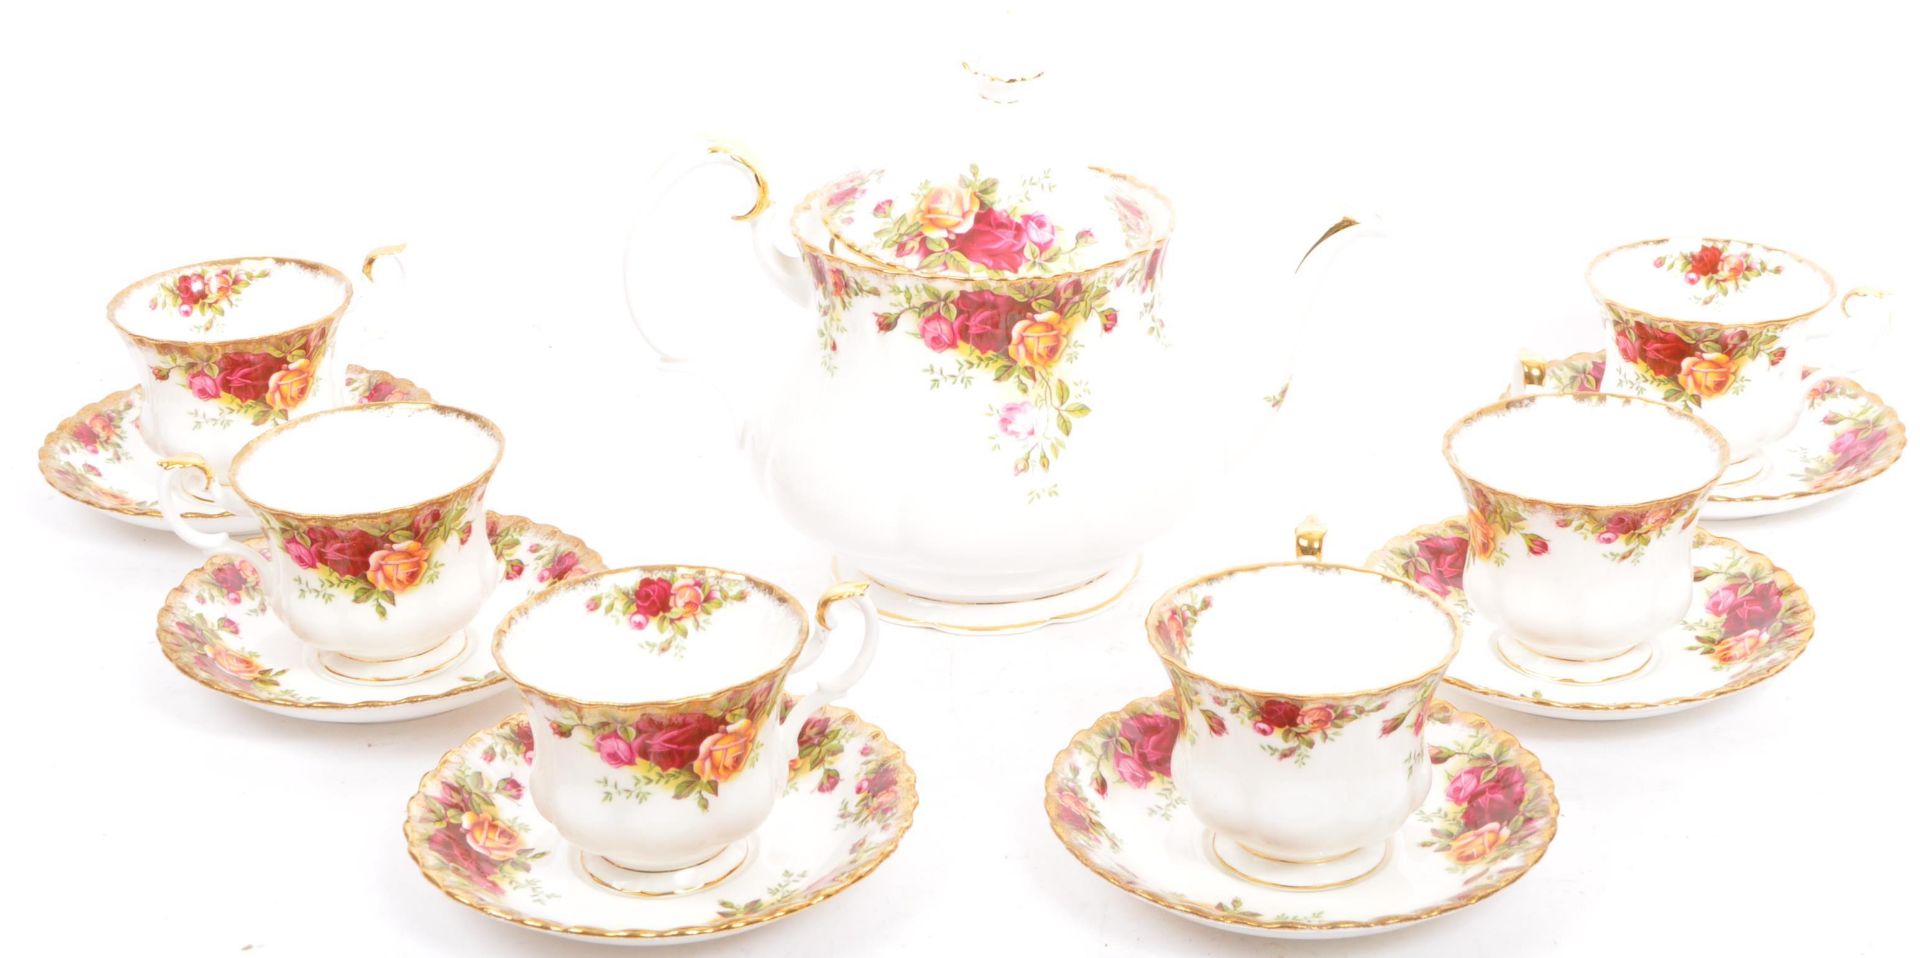 VINTAGE ROYAL ALBERT OLD COUNTRY ROSES 6 PIECE TEA SET - Image 4 of 8